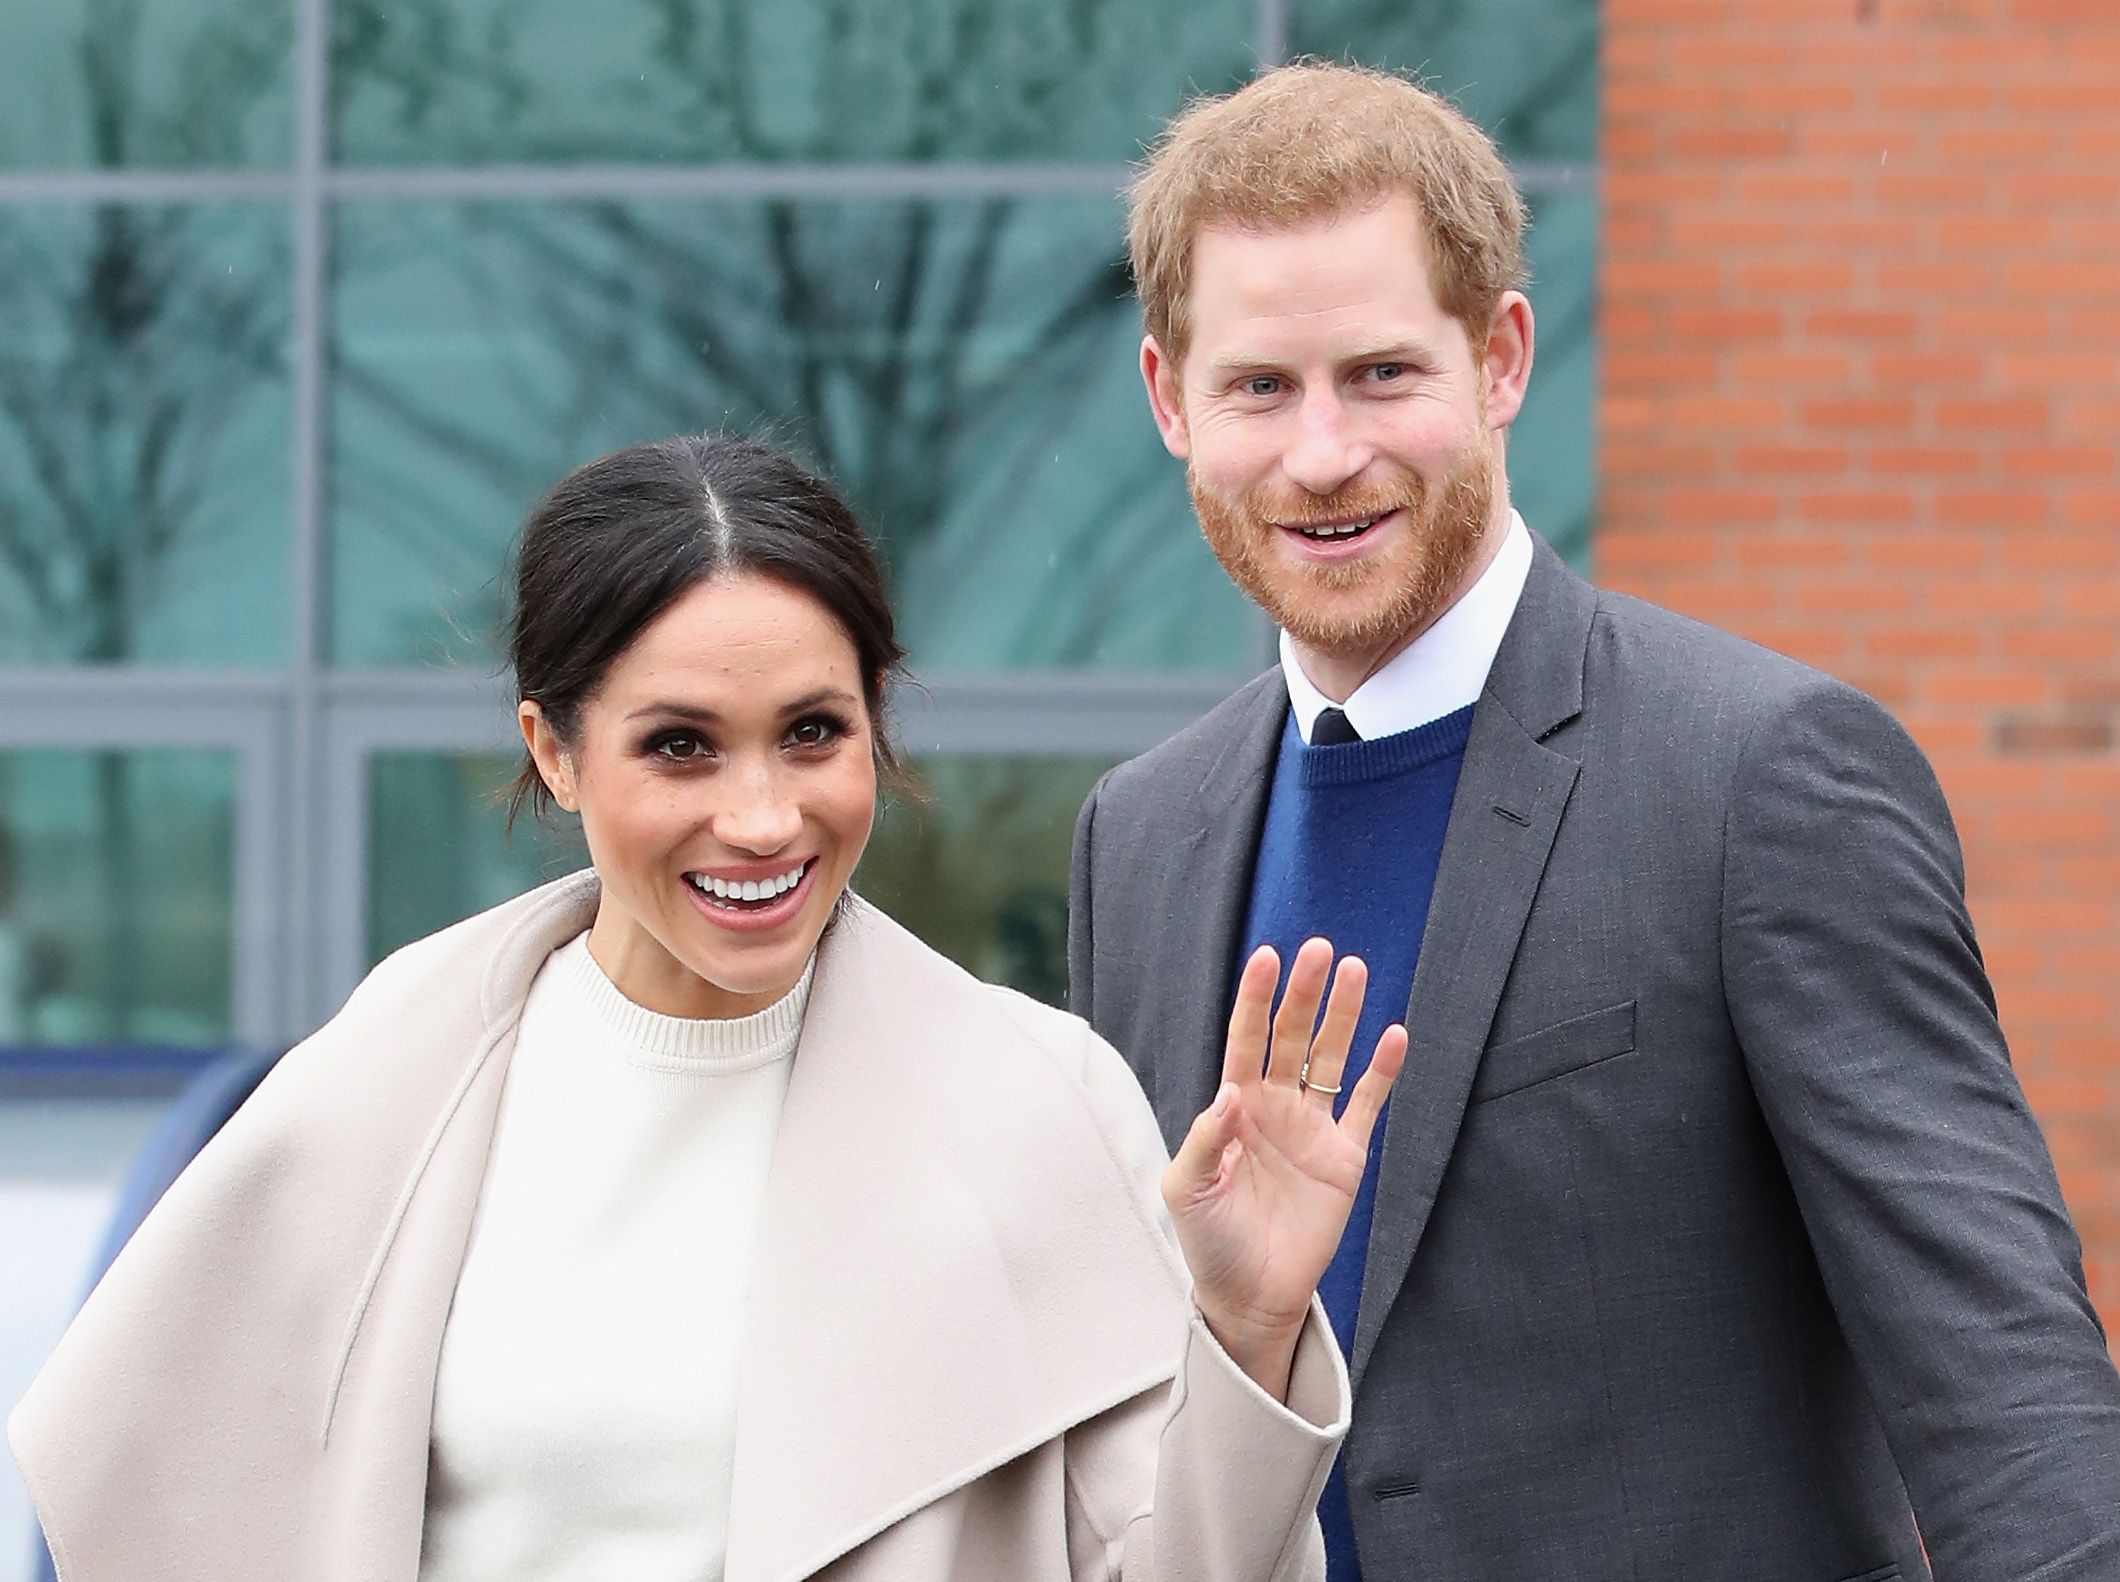 Meghan Markle and Prince Harry depart from Catalyst Inc. on March 23, 2018, in Belfast, Northern Ireland | Photo: Chris Jackson - Pool/Getty Images